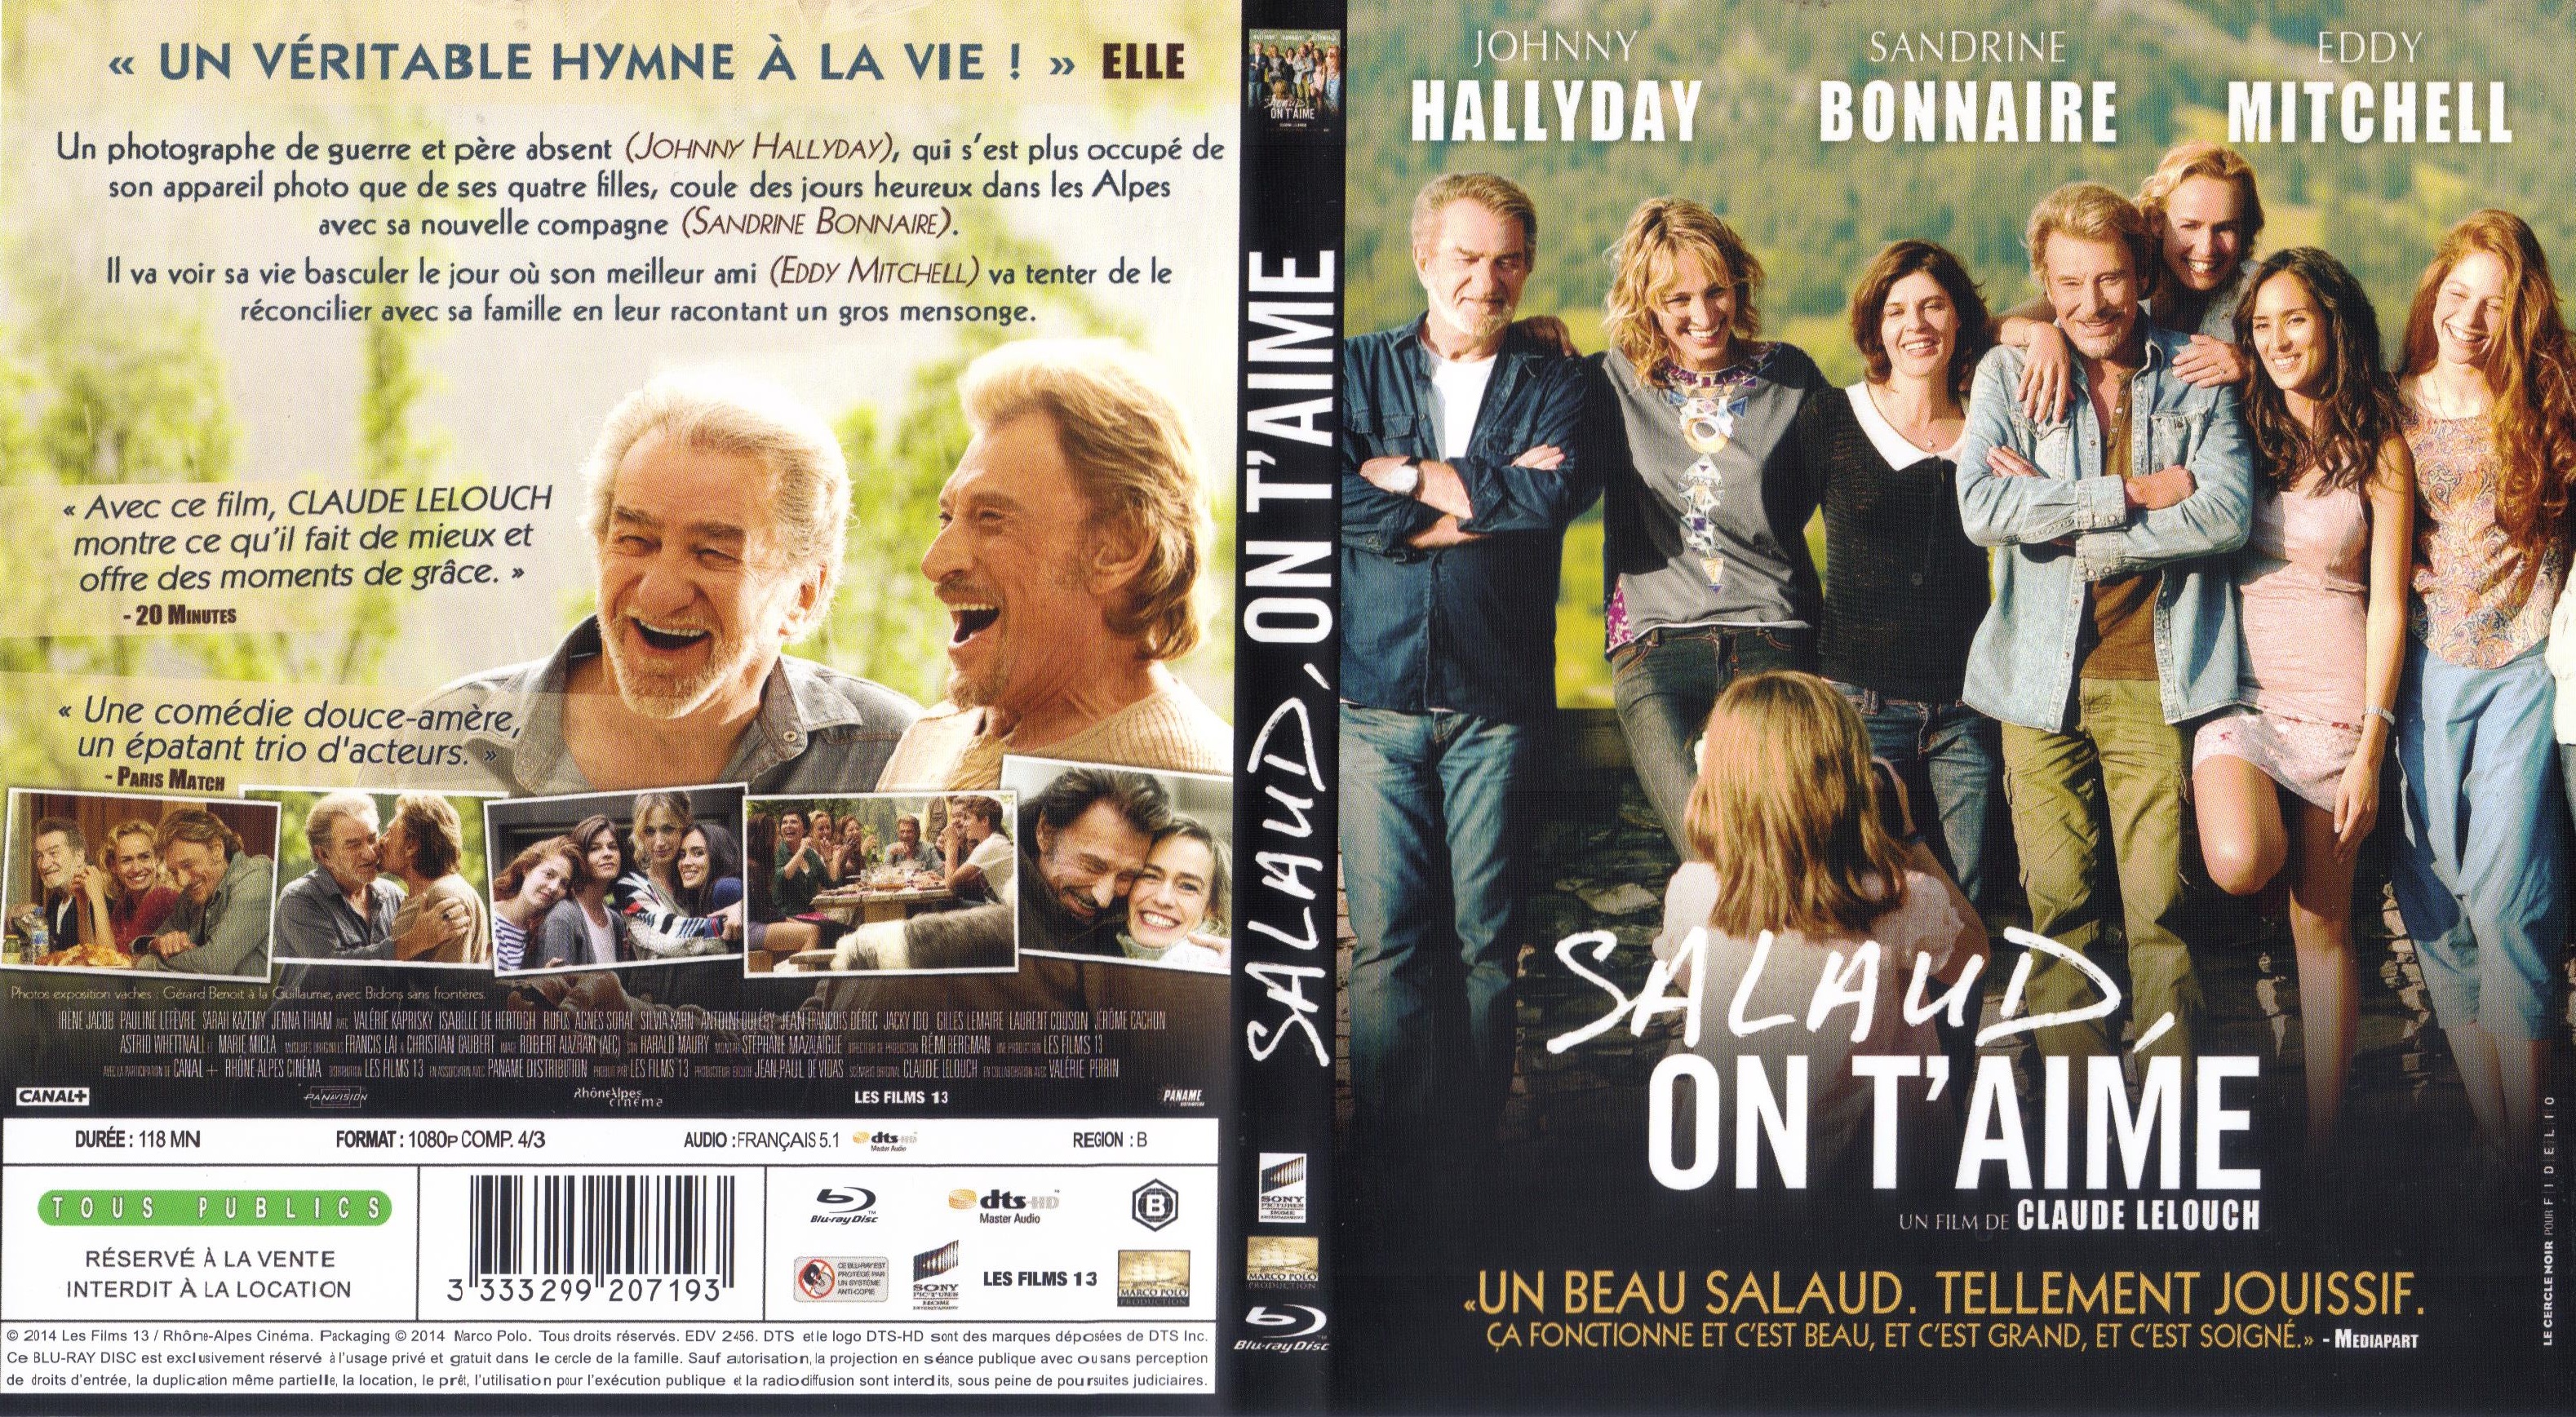 Jaquette DVD Salaud, on t